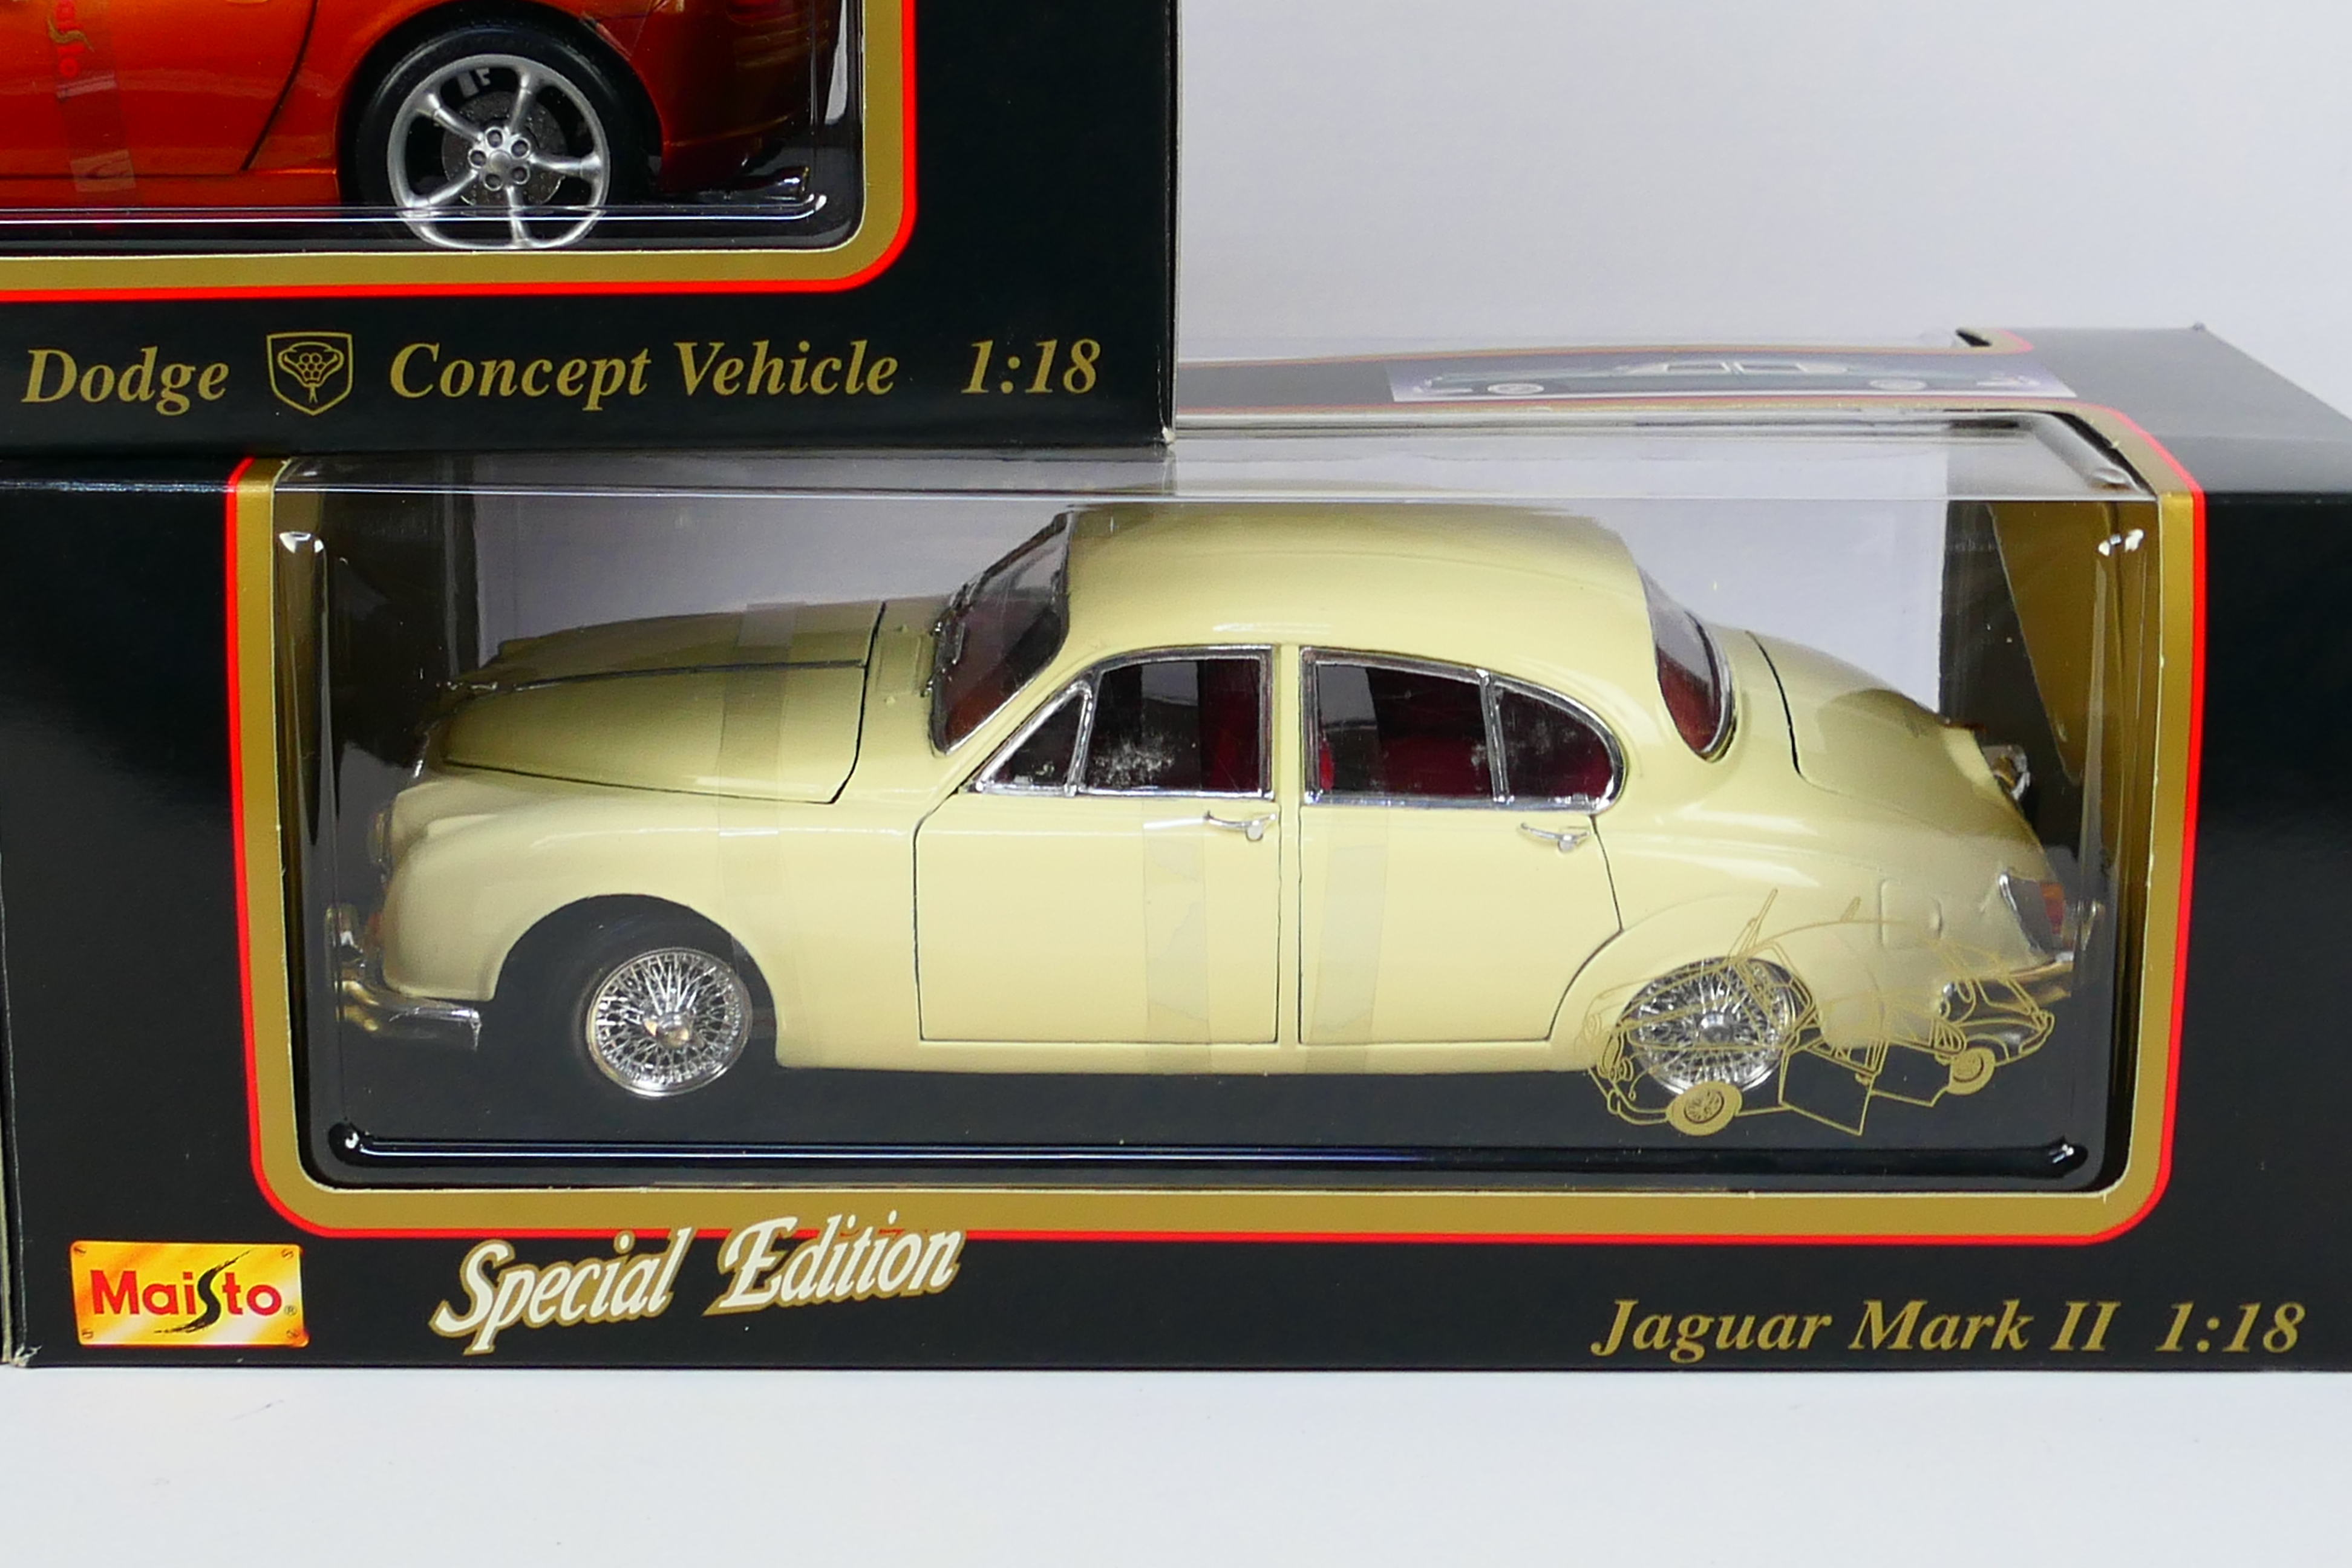 Maisto - Three boxed diecast 1:18 scale model cars from Maisto. - Image 4 of 4